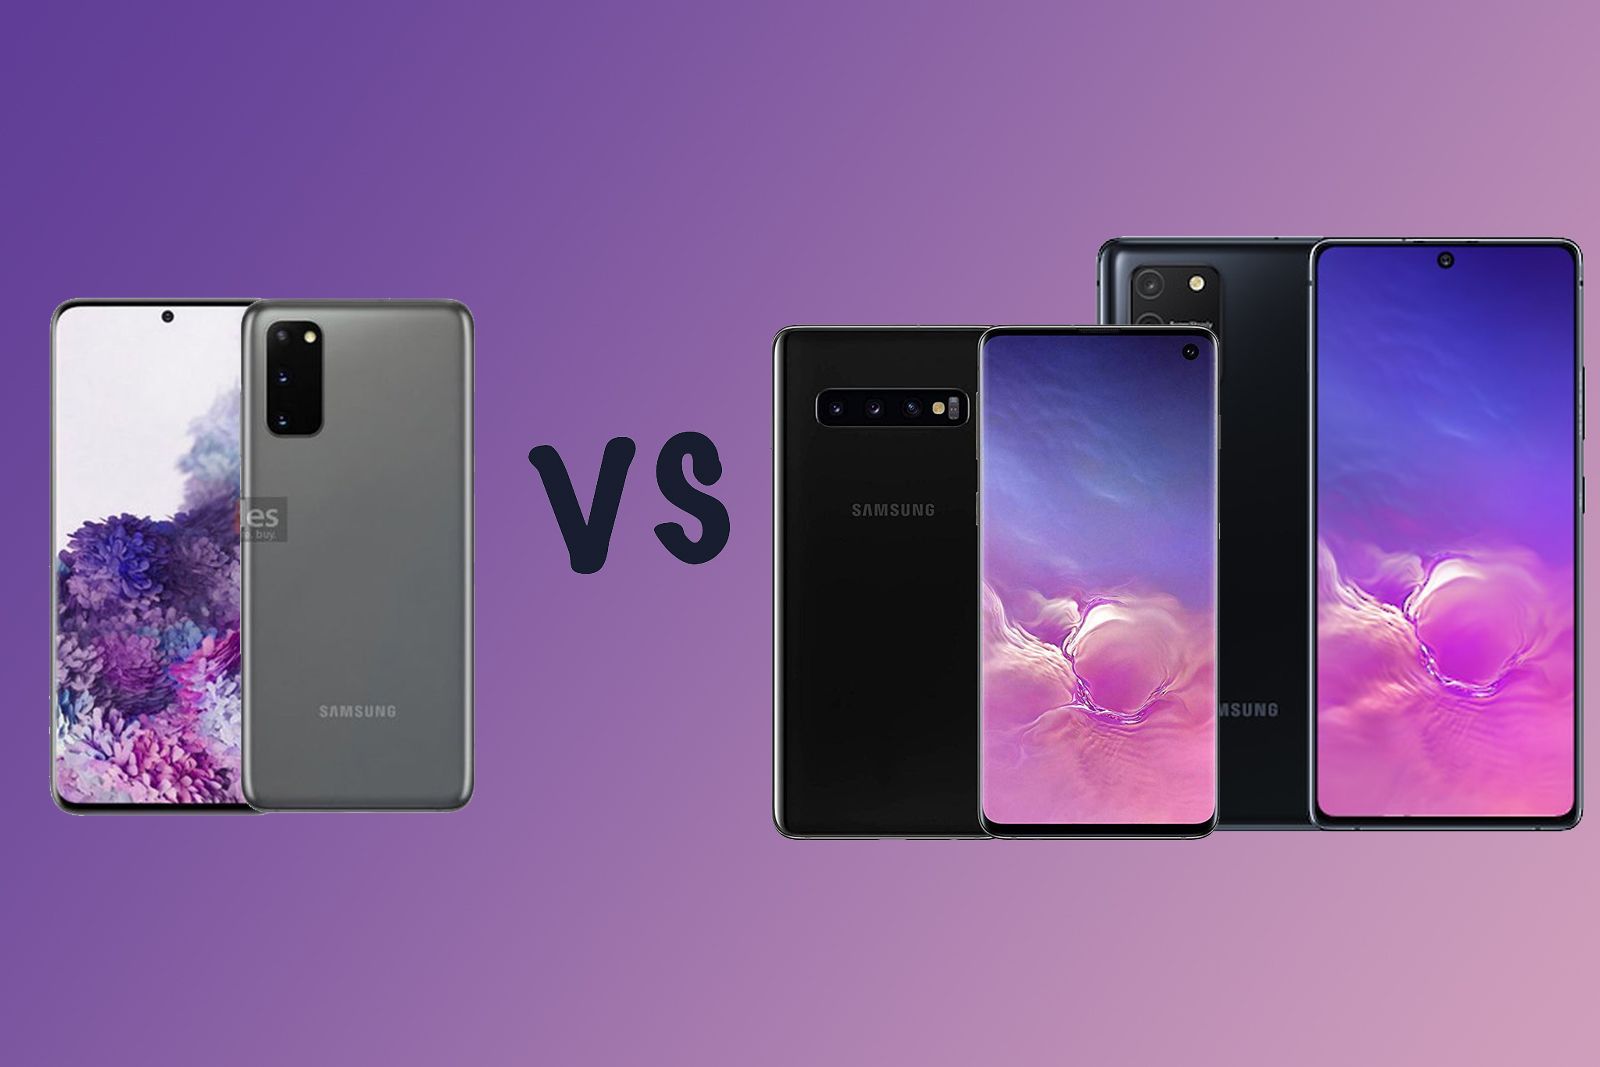 Samsung Galaxy S20 vs Galaxy S10 vs Galaxy S10 Lite How do they compare image 1